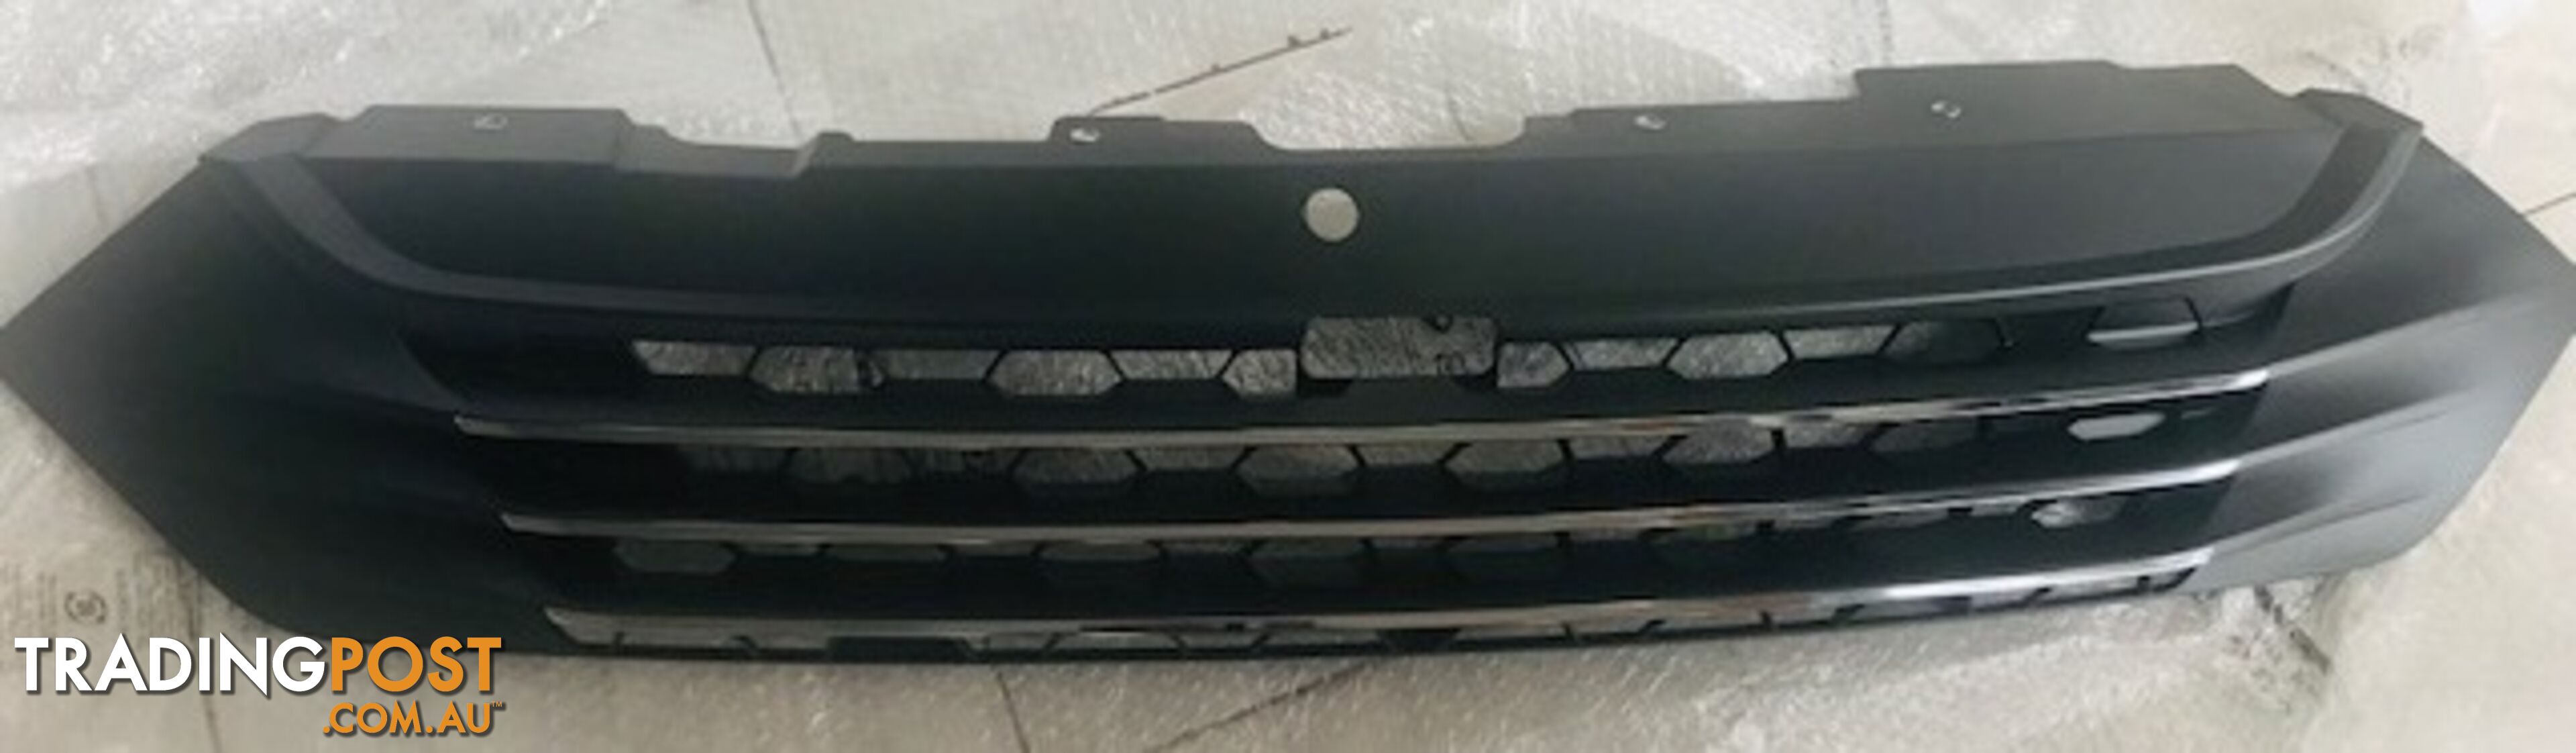 IVECO DAILY FRONT GRILLE GENUINE 5802075842 2018-2019MDL